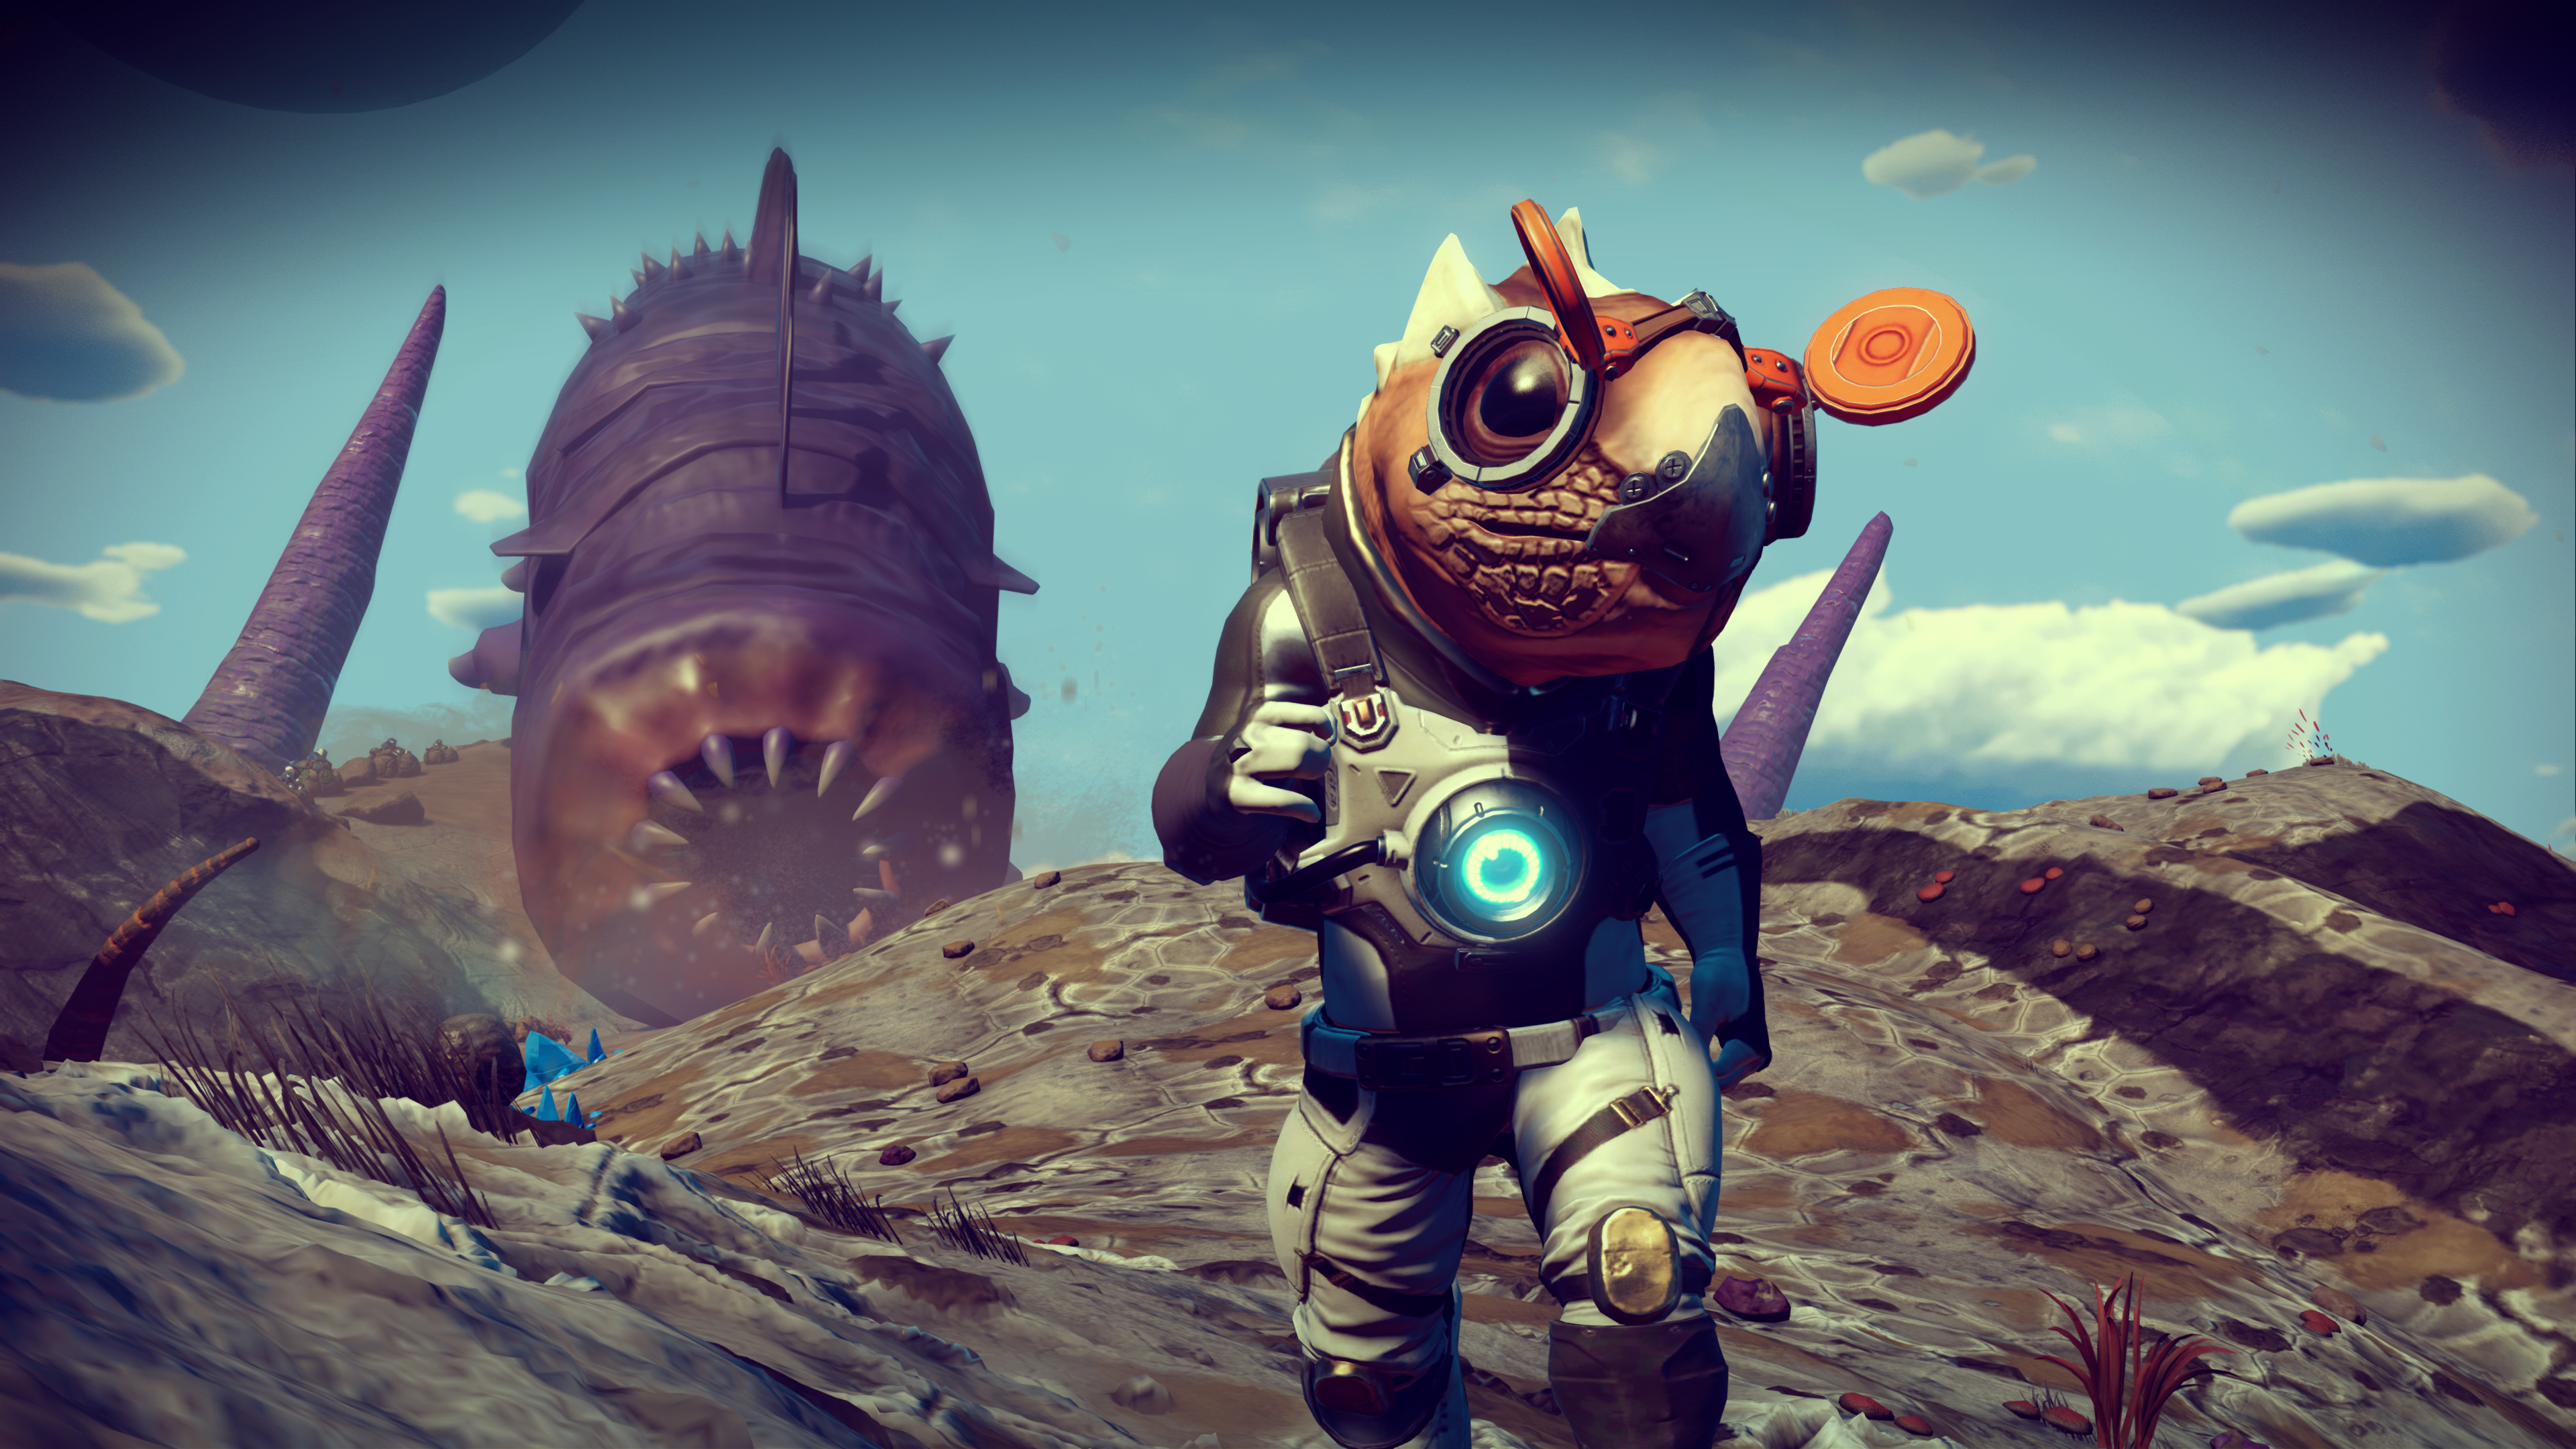 Four years after launch, No Man's Sky's giant sandworms are